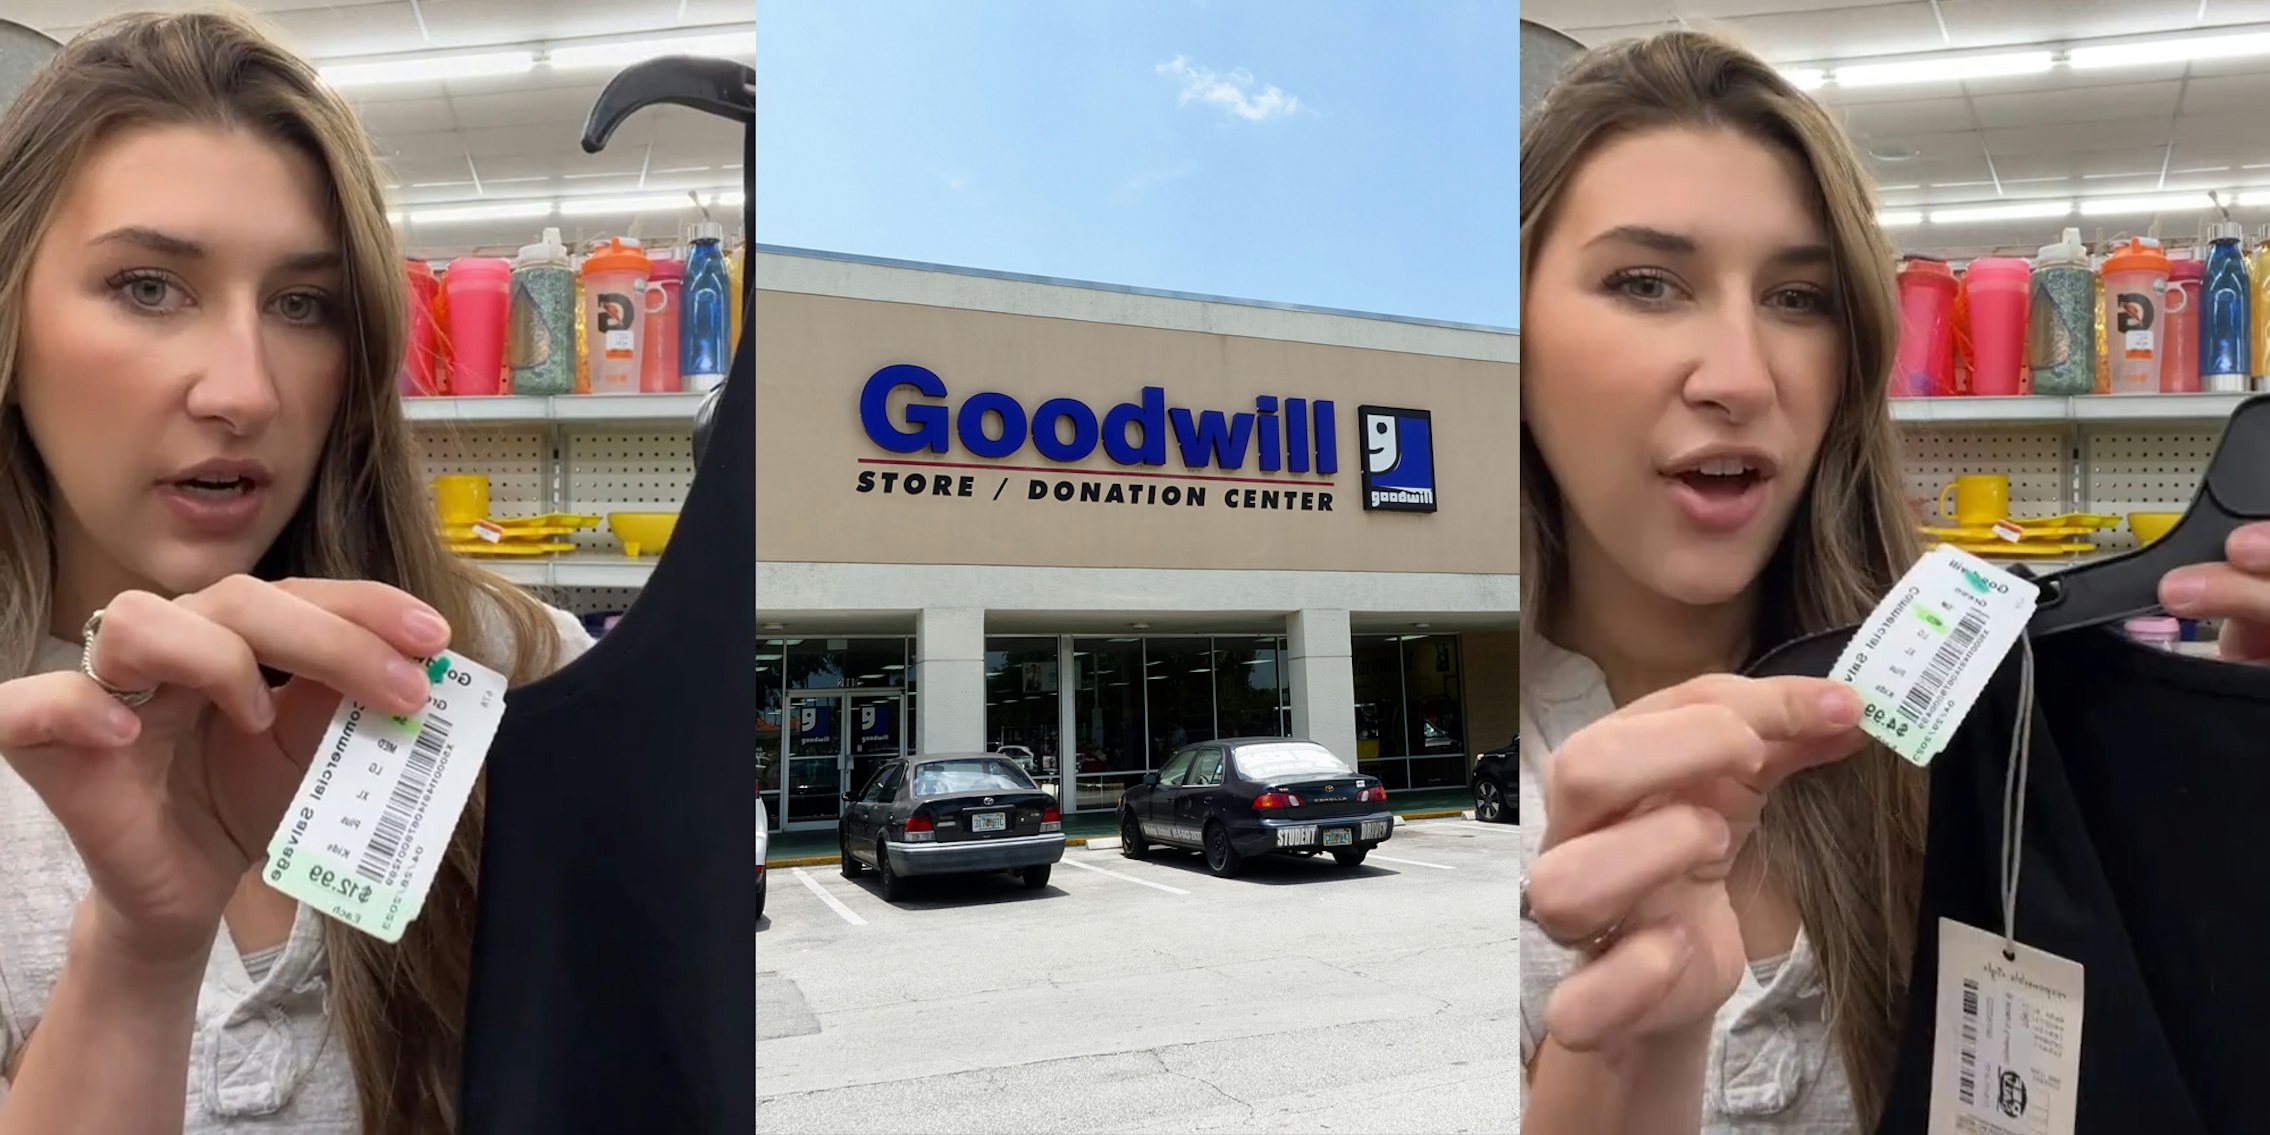 Goodwill customer holding shirt with $12 tag (l) Goodwill building with sign (c) Goodwill customer holding shirt with $4 tag (r)